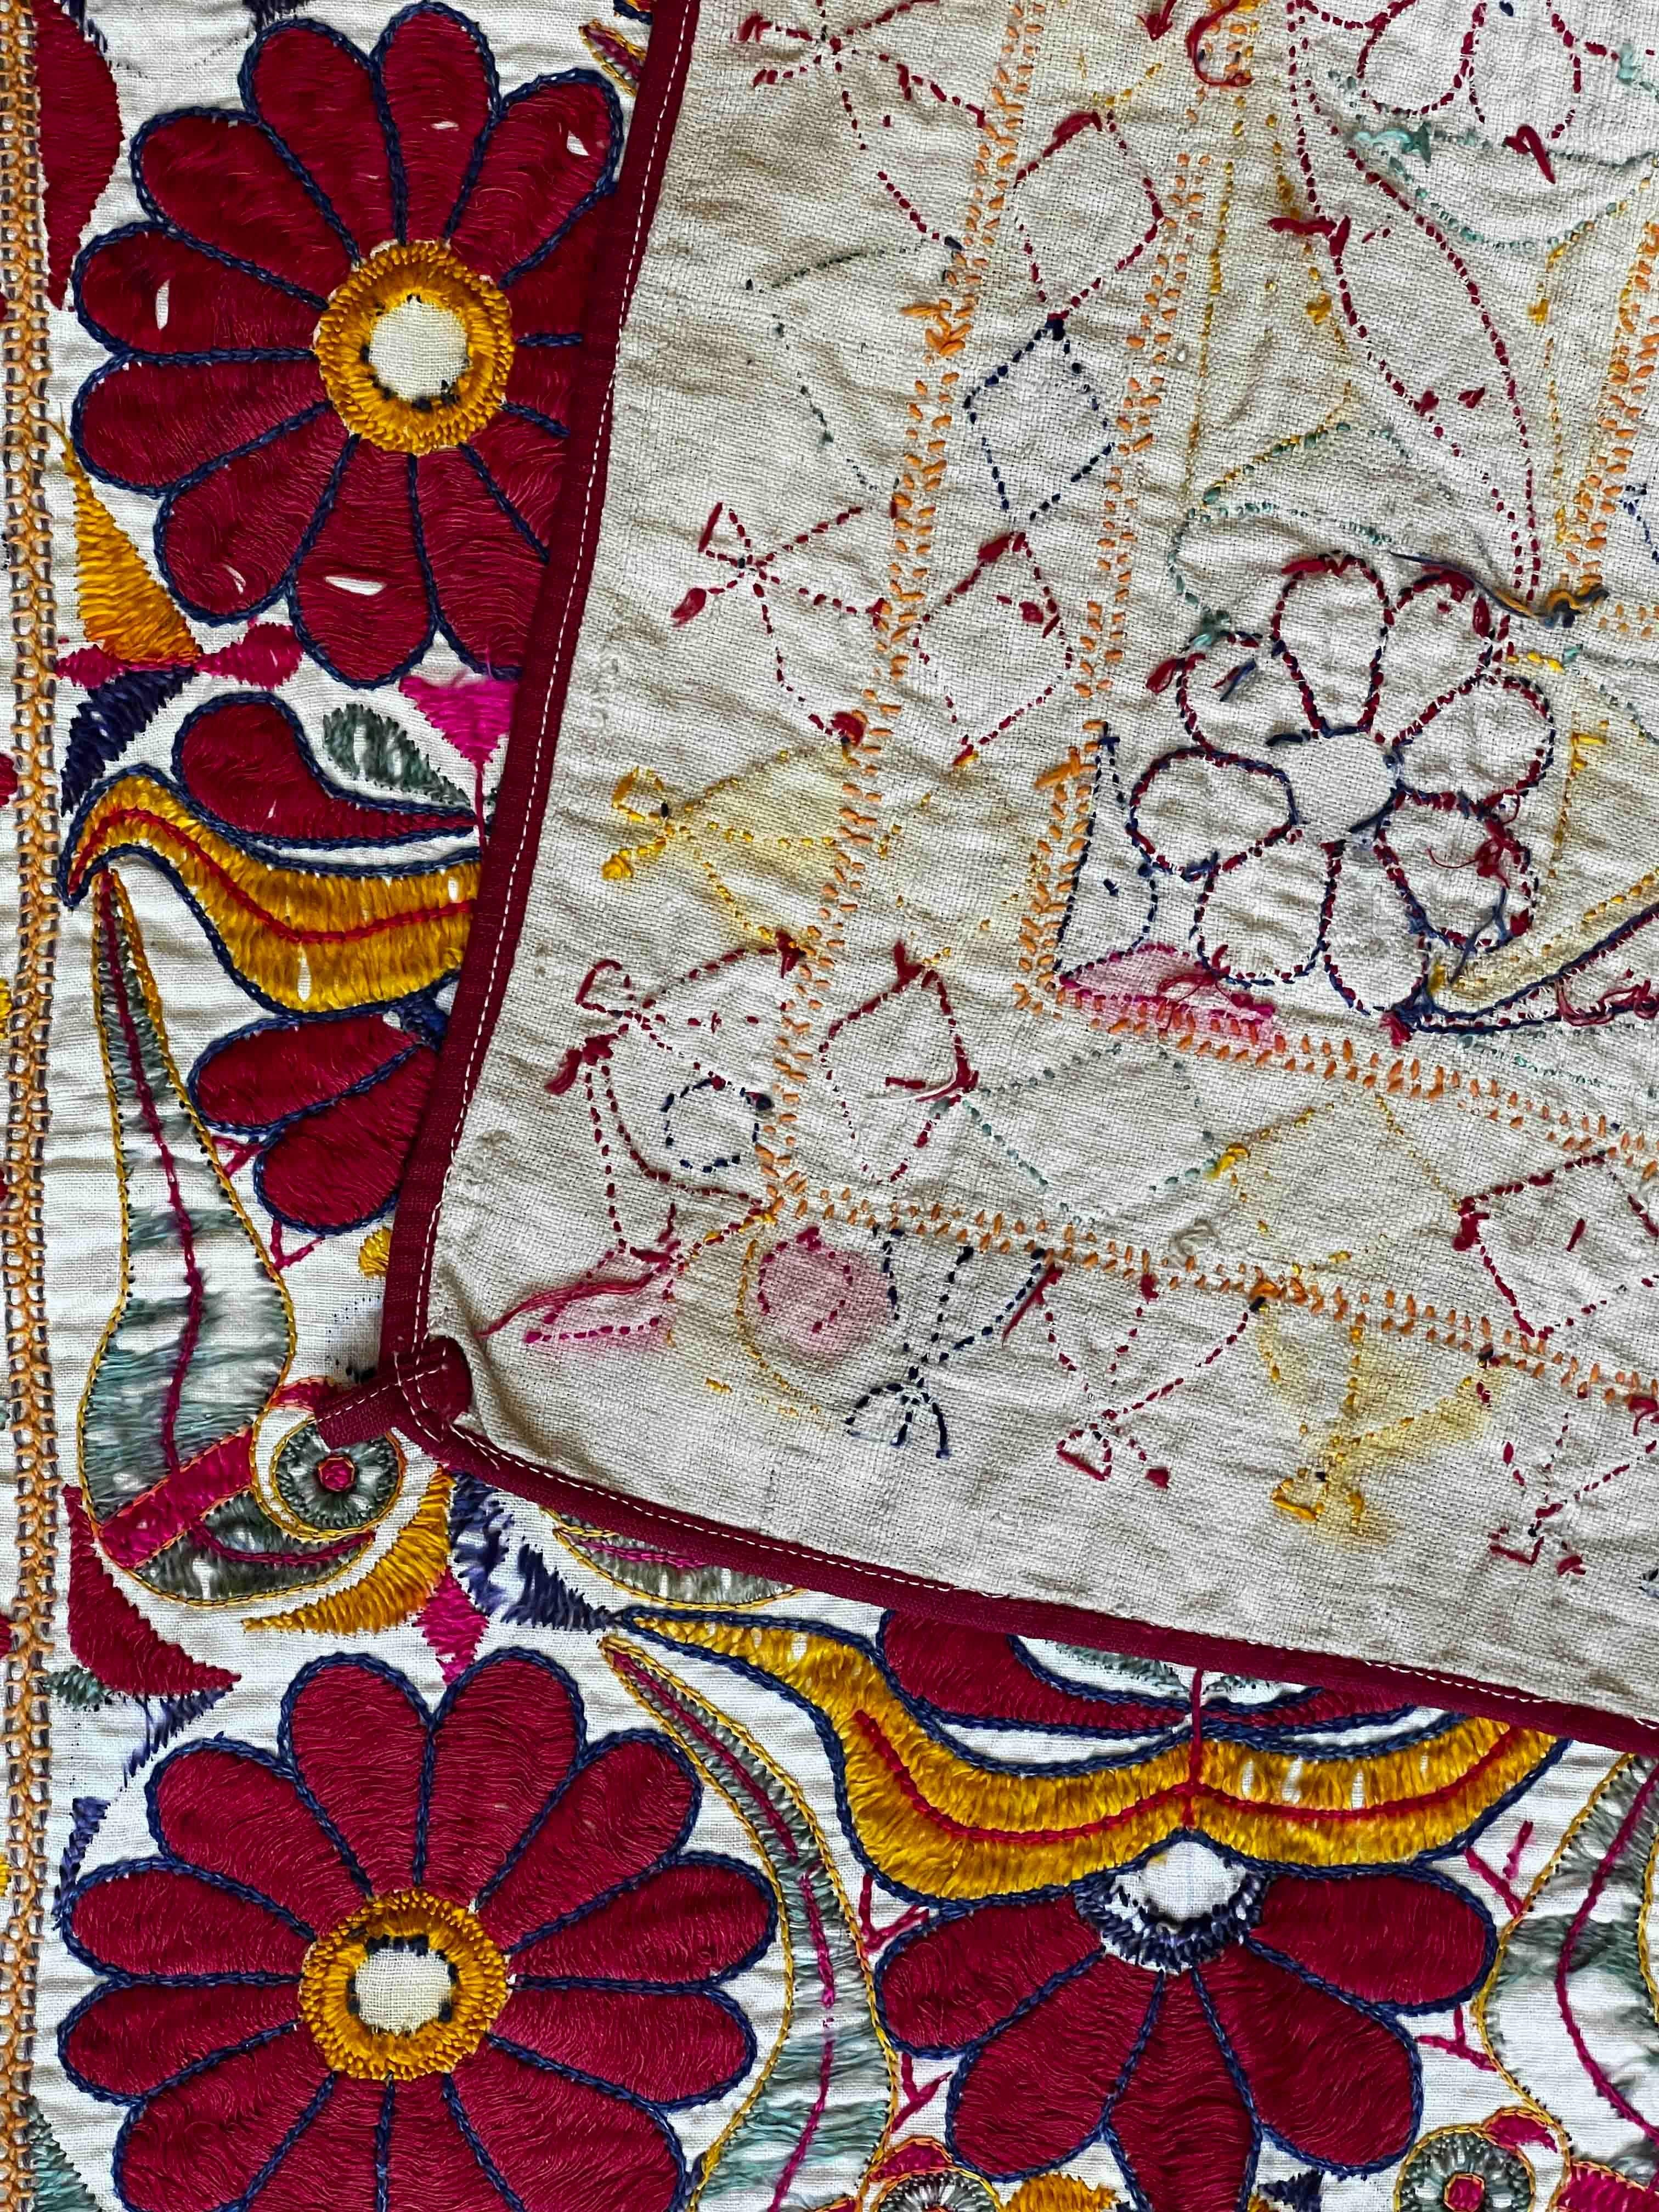 Indian embroidery fabric - N°1221

Thanks to our Restoration-Conservation workshop and also Our know-how, 
we are pleased to present to you works of art in fabric such as Tapestry, 
Carpets and Textiles in very good conservation quality and well